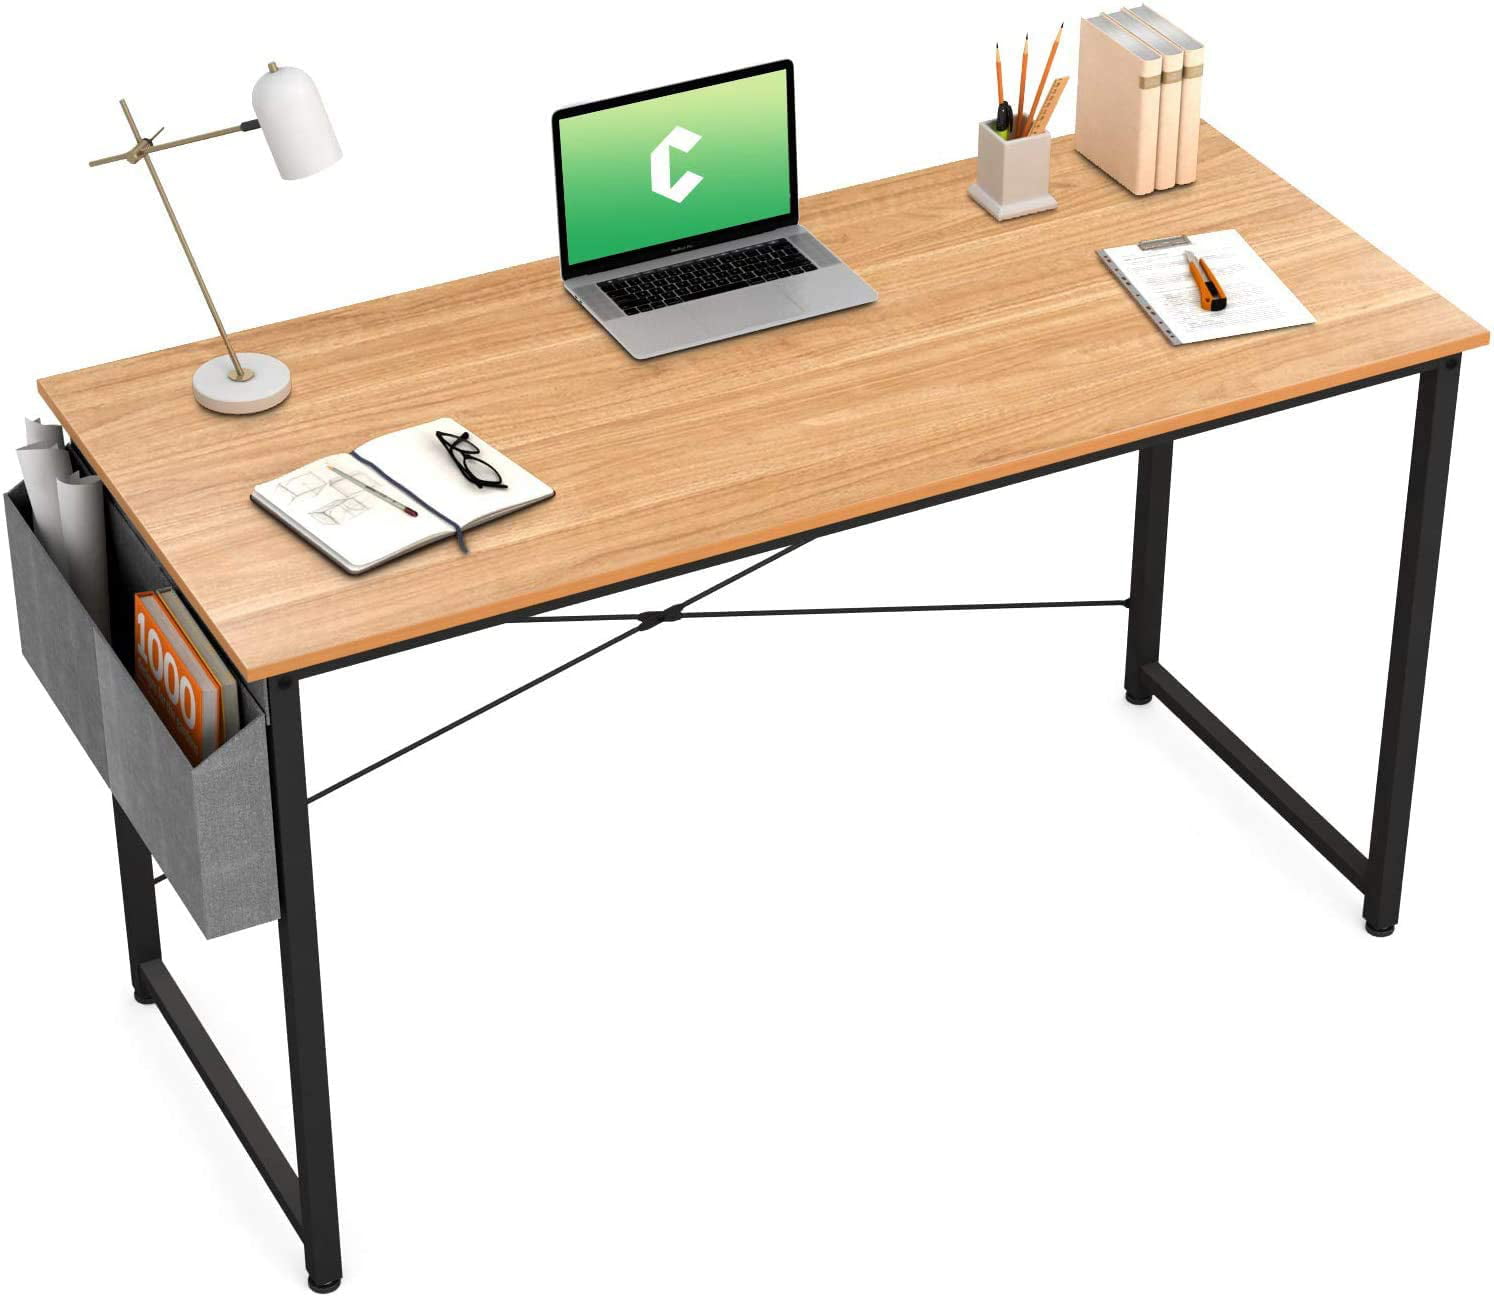 Notebook Writing Desk Cubiker Computer Desk 40 with Extra Strong Legs Sturdy Office Desk Modern Simple Style Table for Home Office Black 